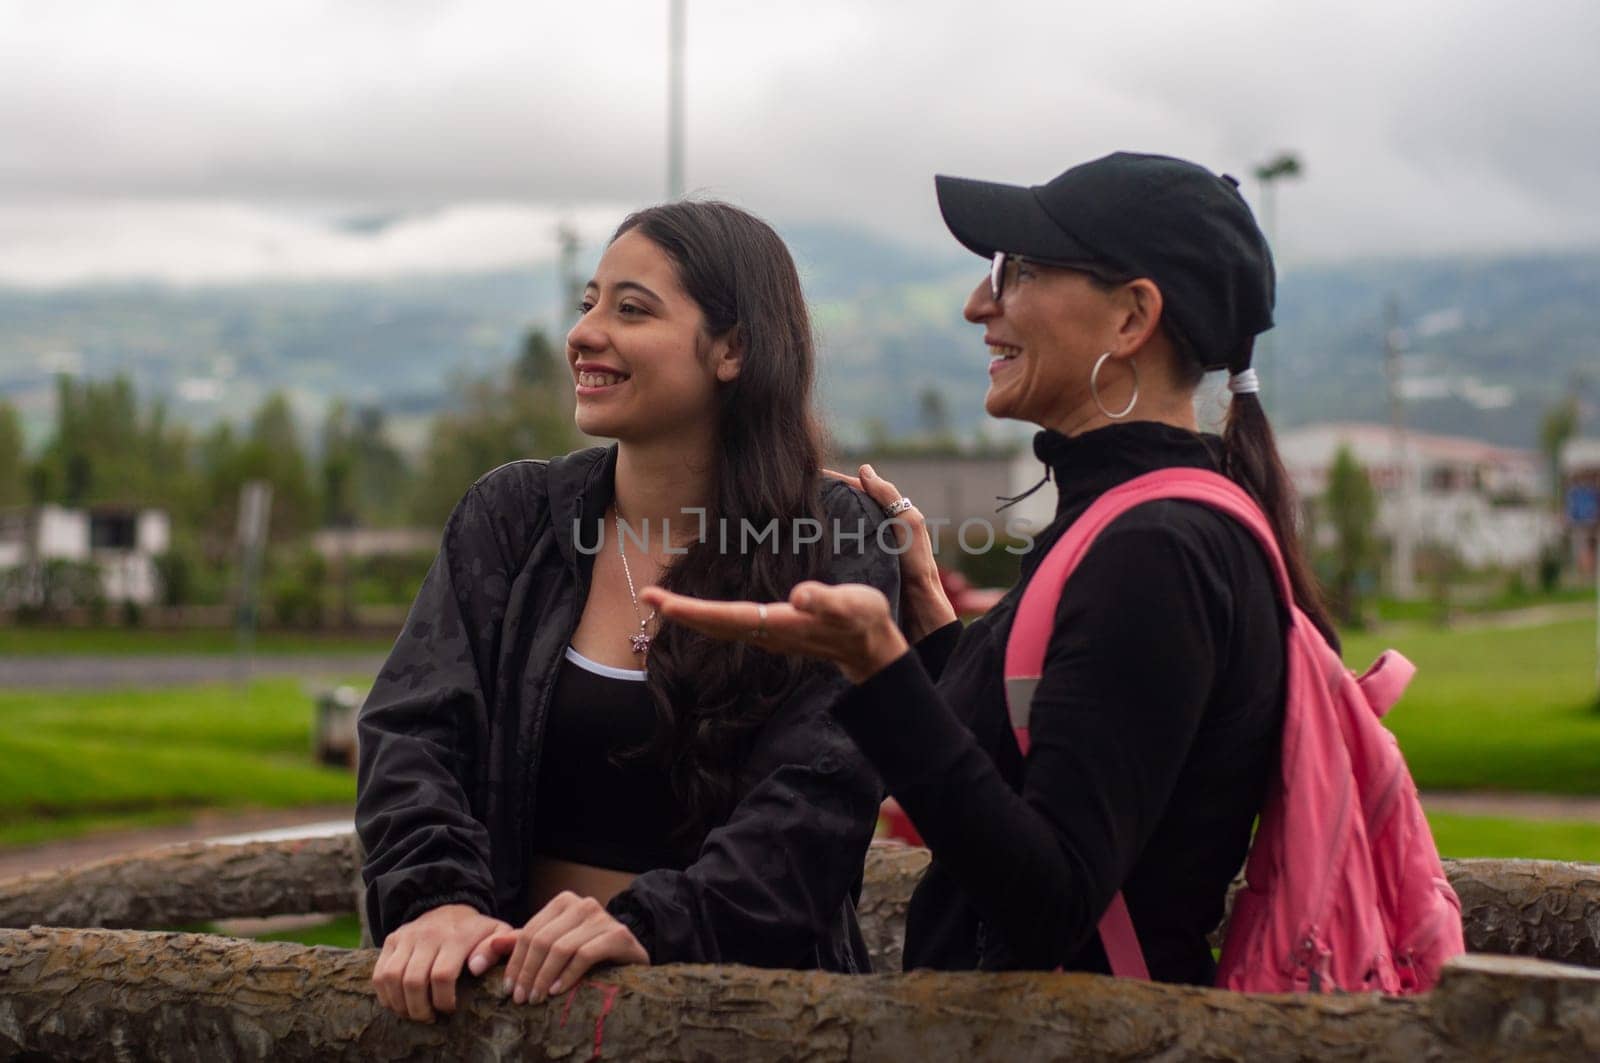 mother sharing with her daughter a pleasant moment in a park in the early morning. march 8. women's day by Raulmartin